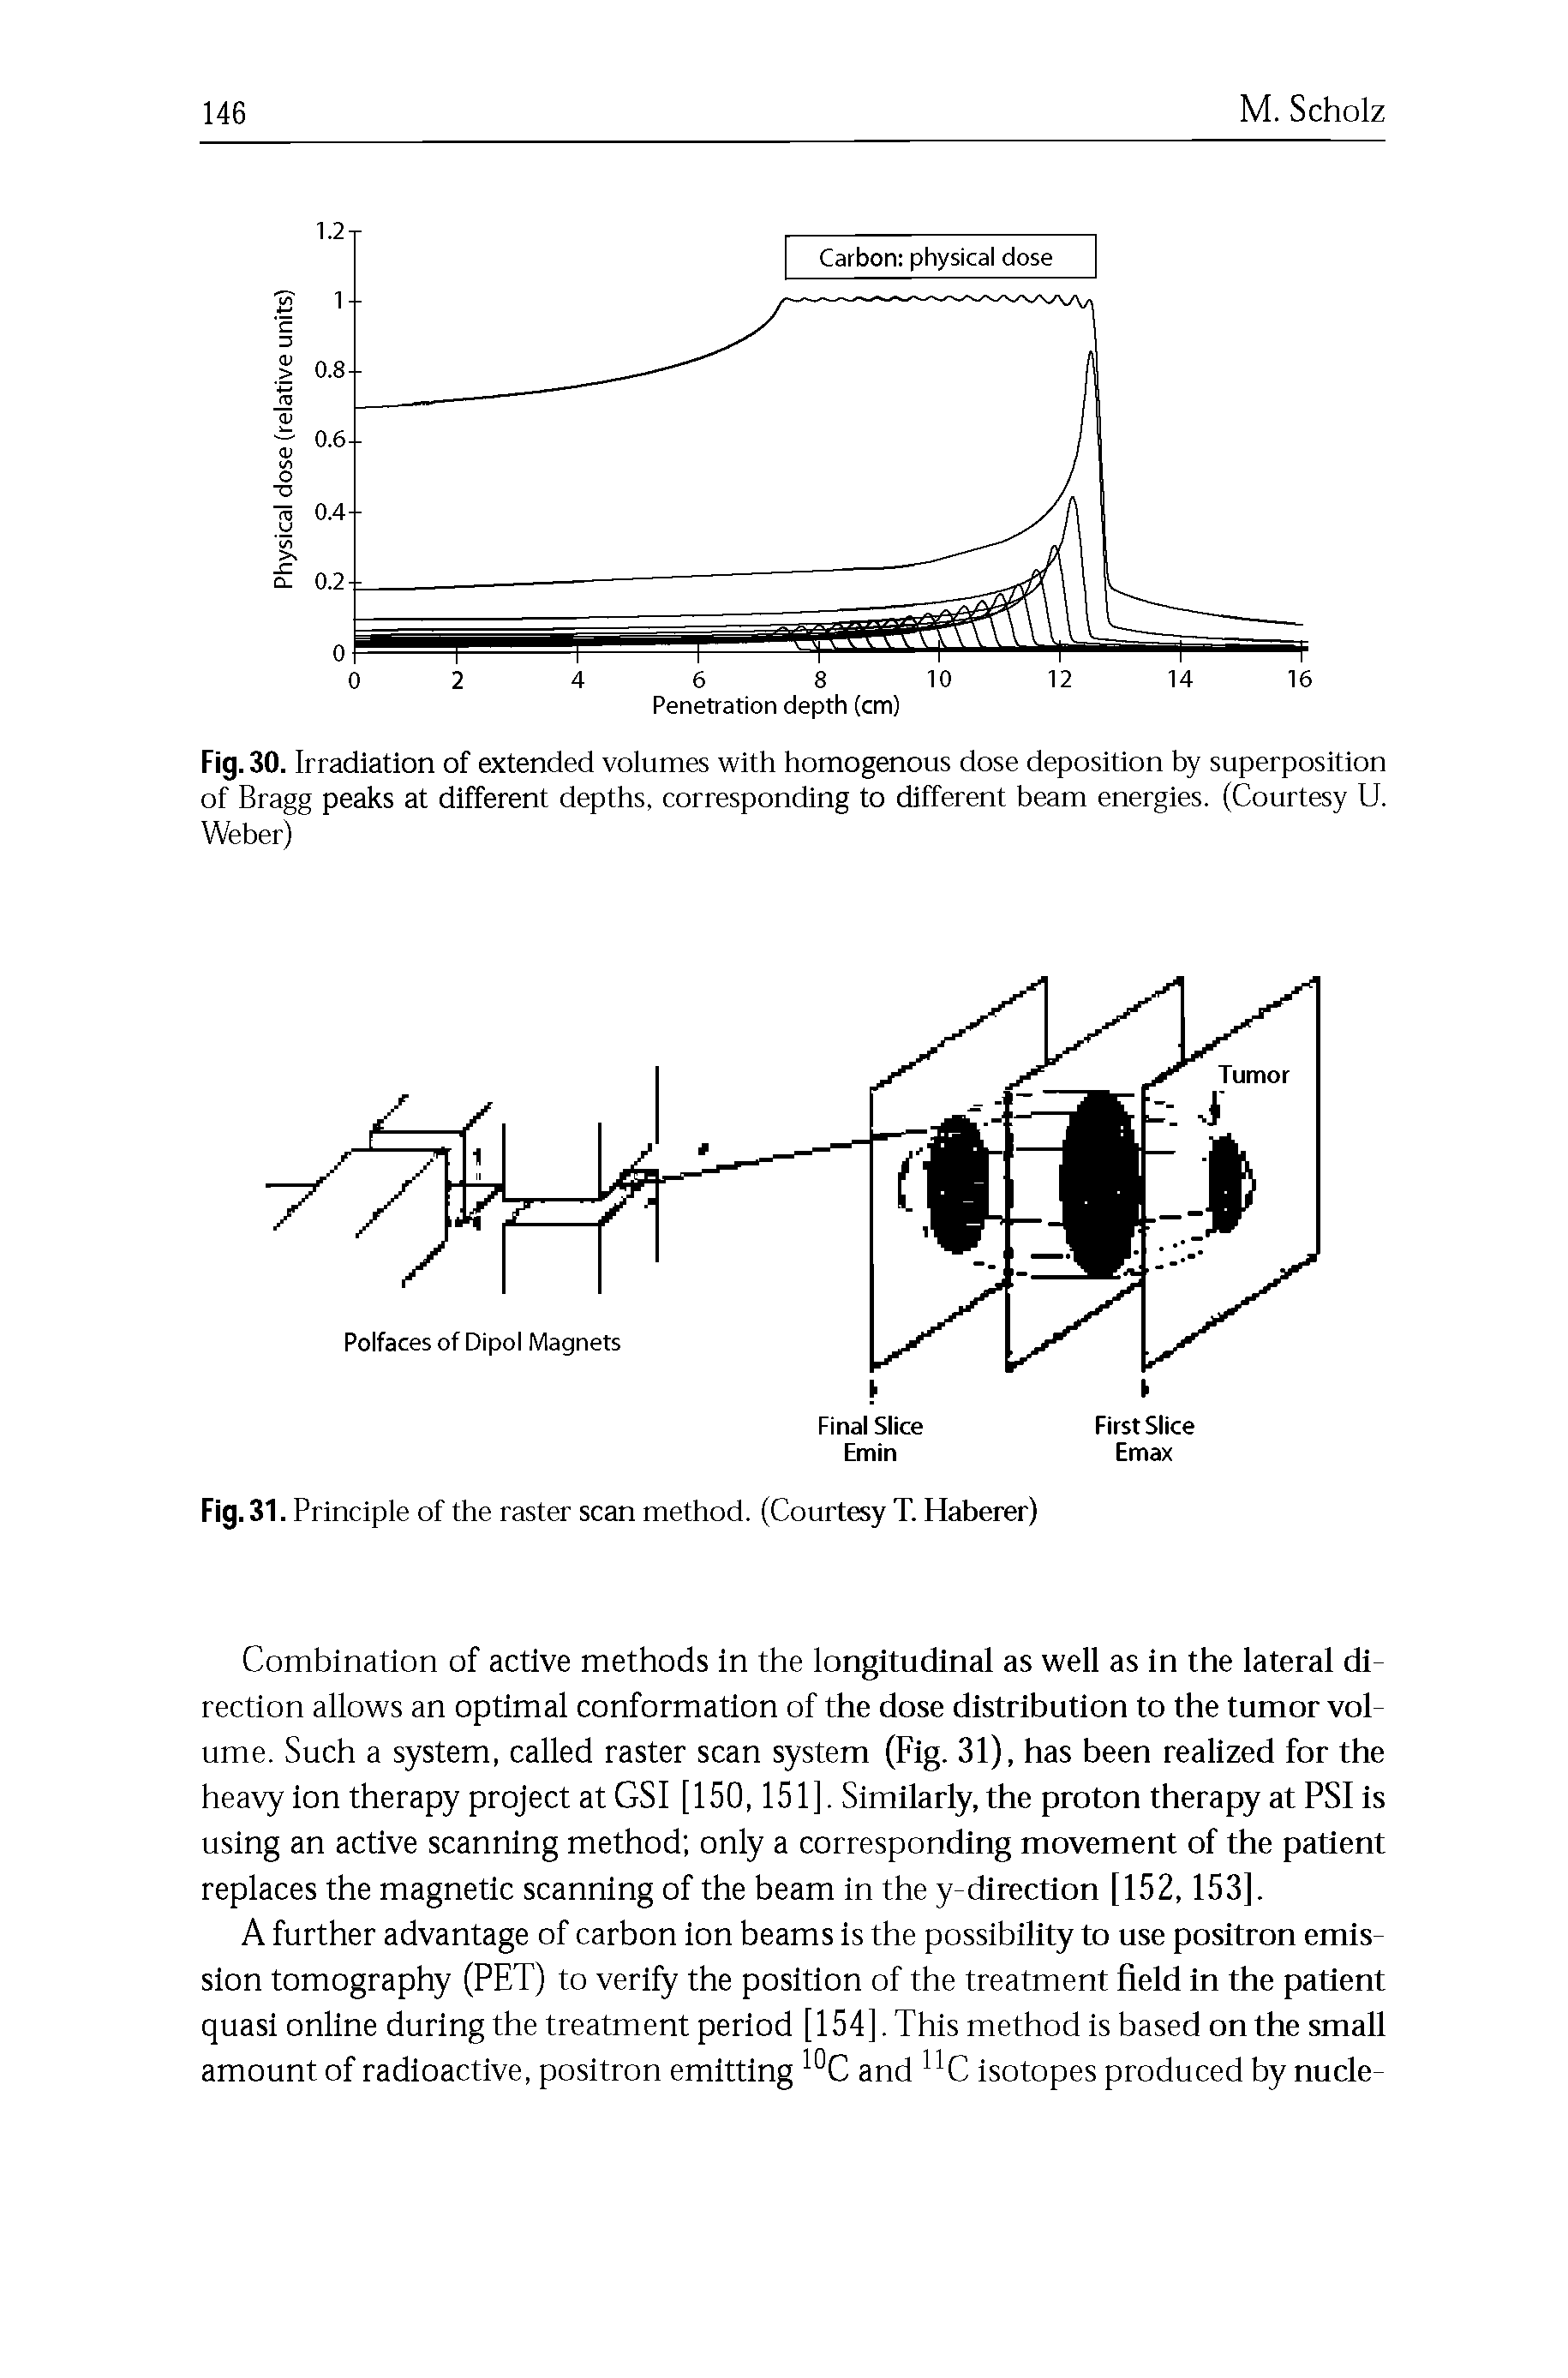 Fig. 30. Irradiation of extended volumes with homogenous dose deposition by superposition of Bragg peaks at different depths, corresponding to different beam energies. (Courtesy U. Weber)...